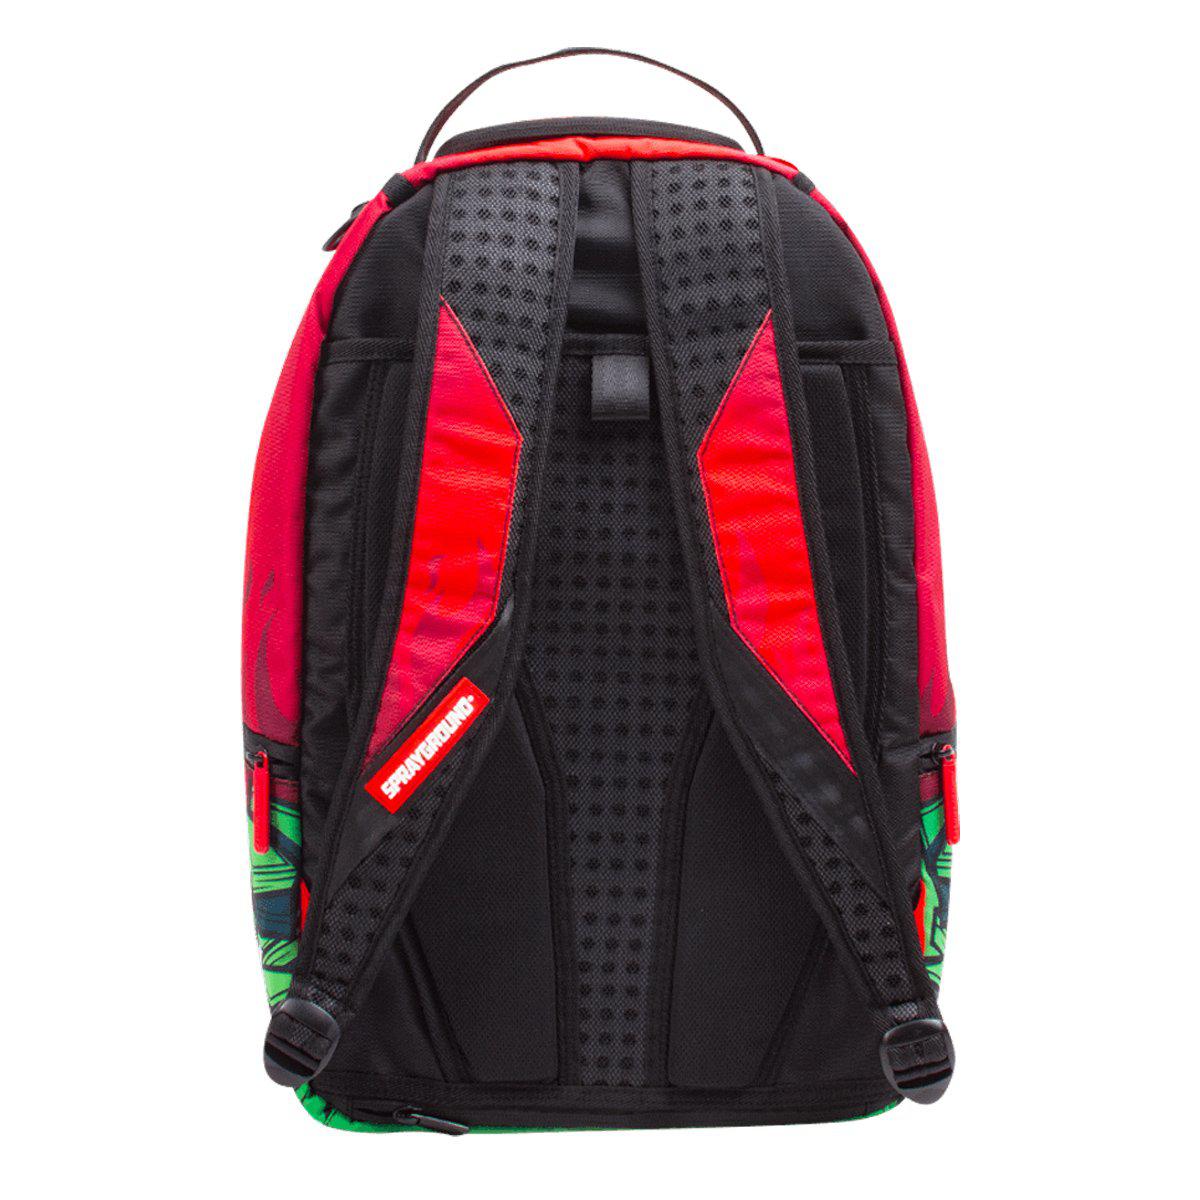 Sprayground Synthetic Nba Youngboy Diablo Bear Backpack in Red - Lyst